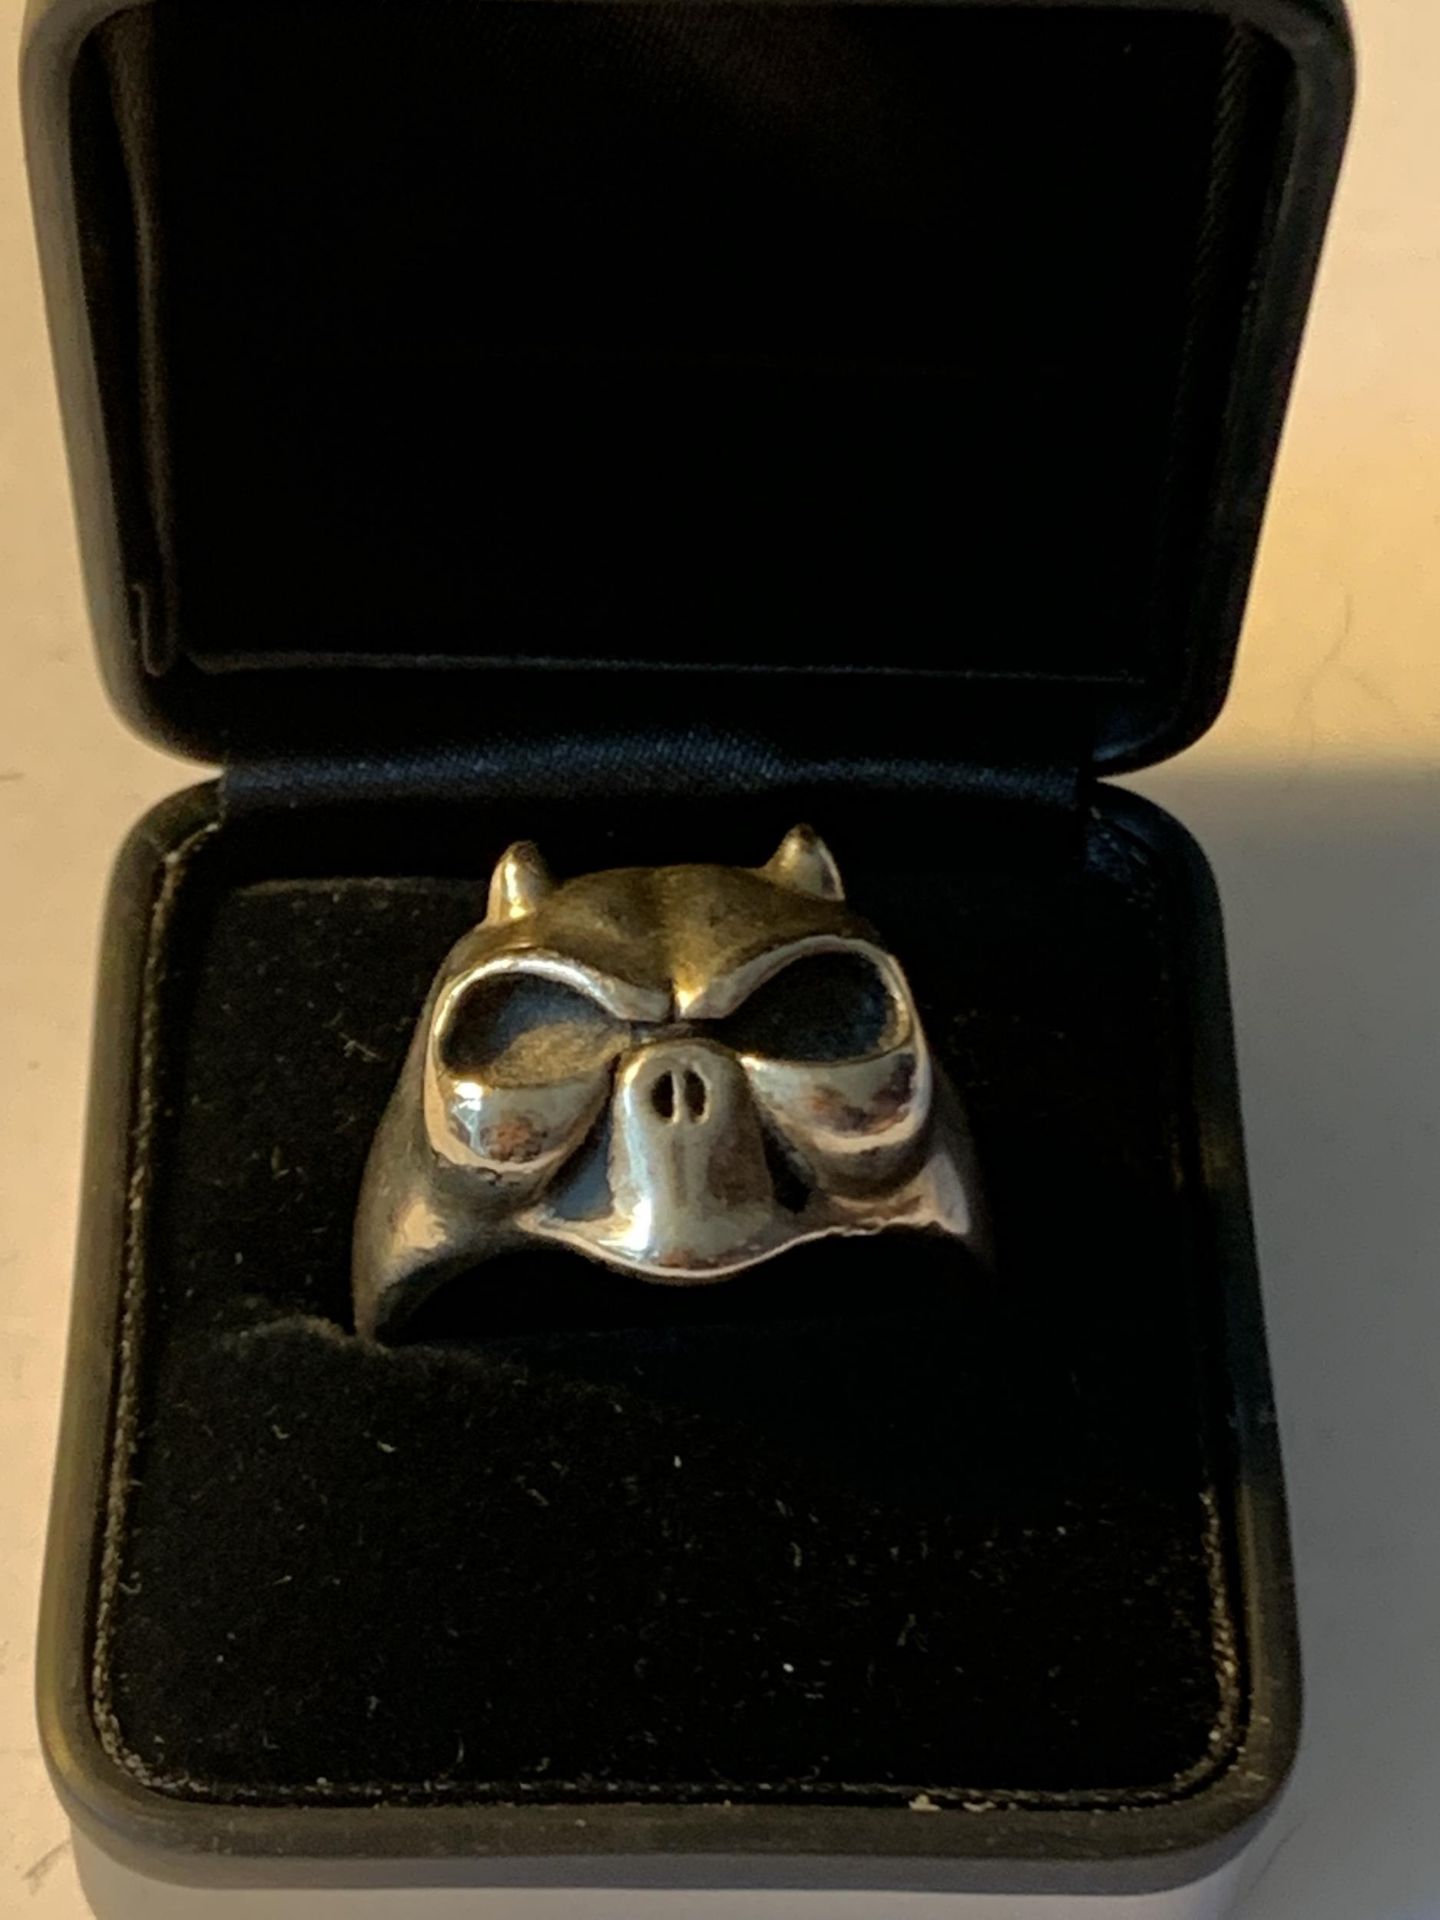 A LARGE SKULL RING IN A PRESENTATION BOX